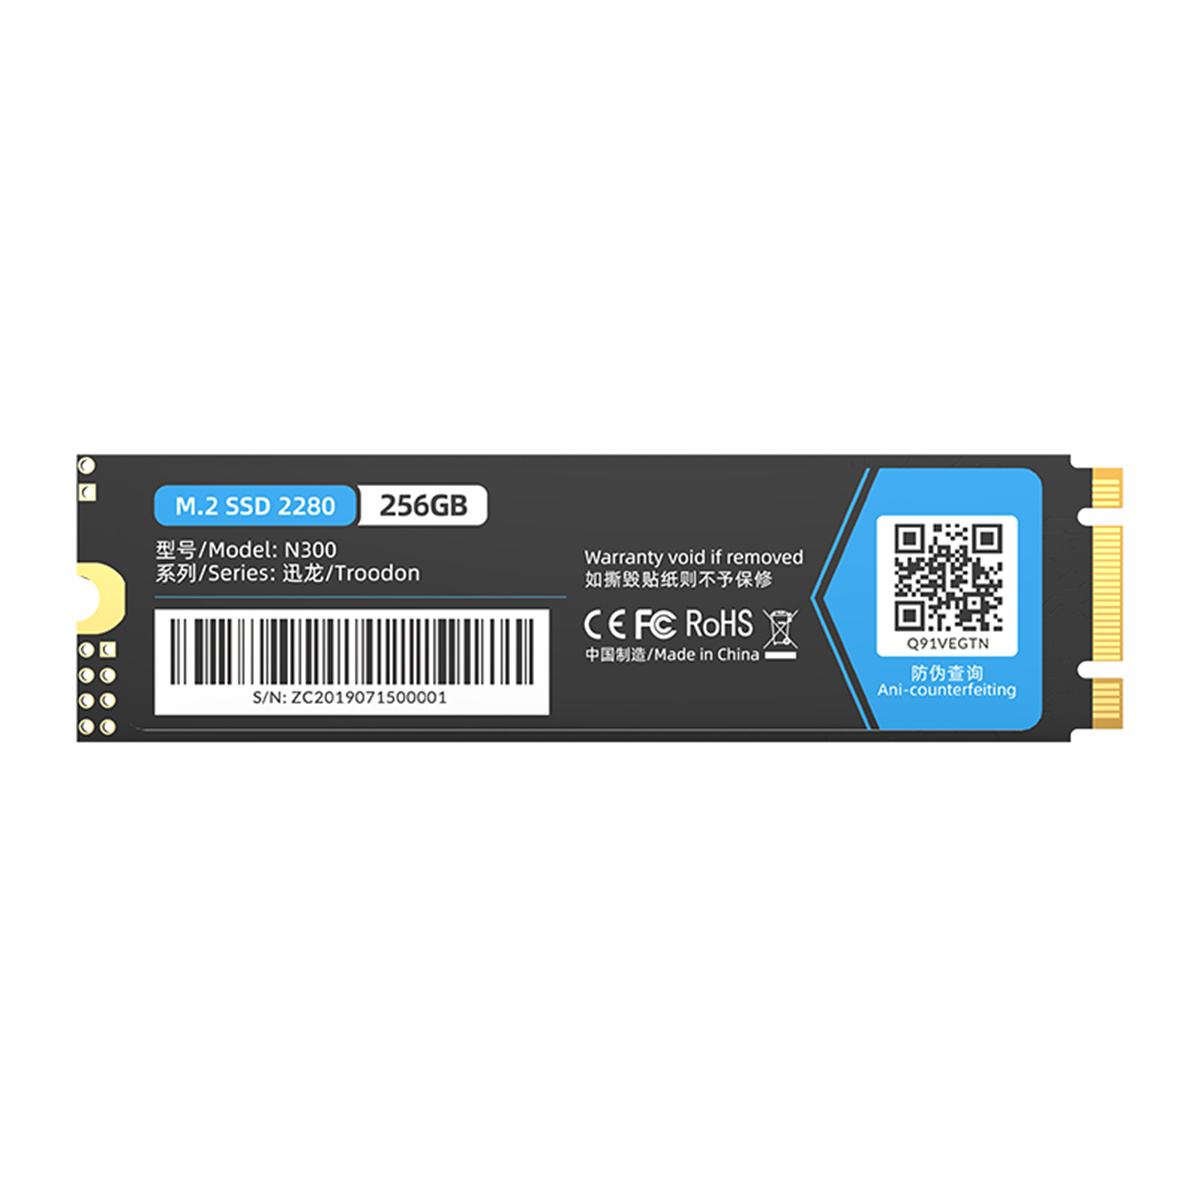 edible And team cold M.2 SSD 256GB - Troodon Series - Orico